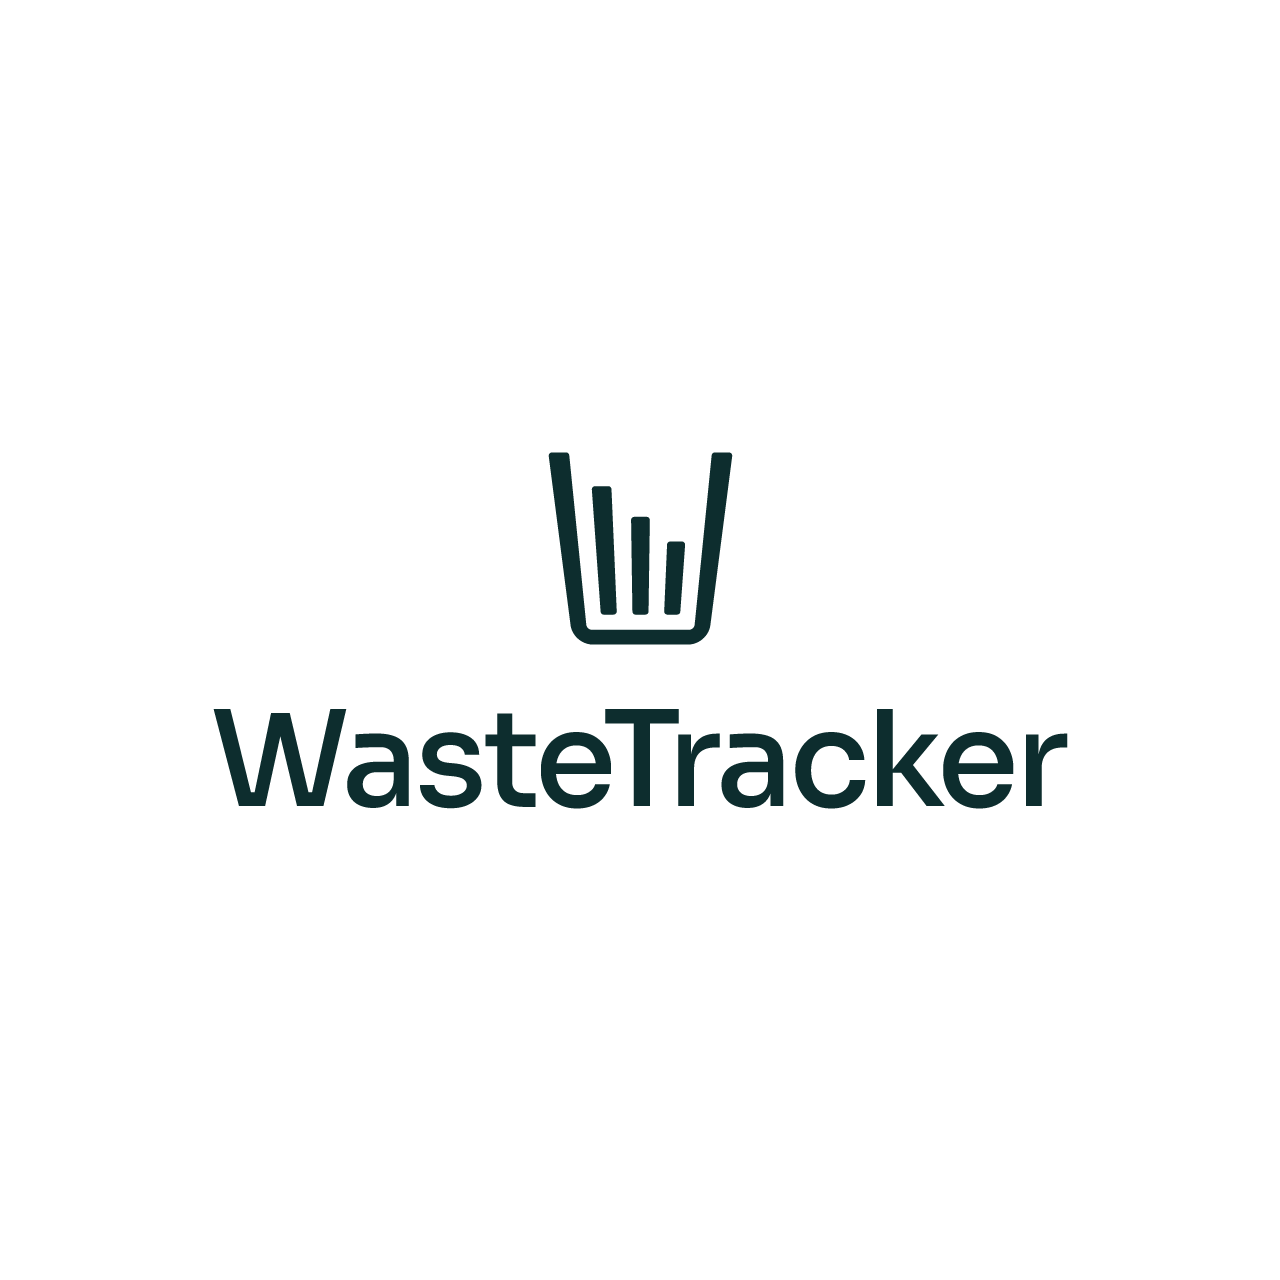 WasteTracker style guide featuring official colors and fonts for consistent branding.